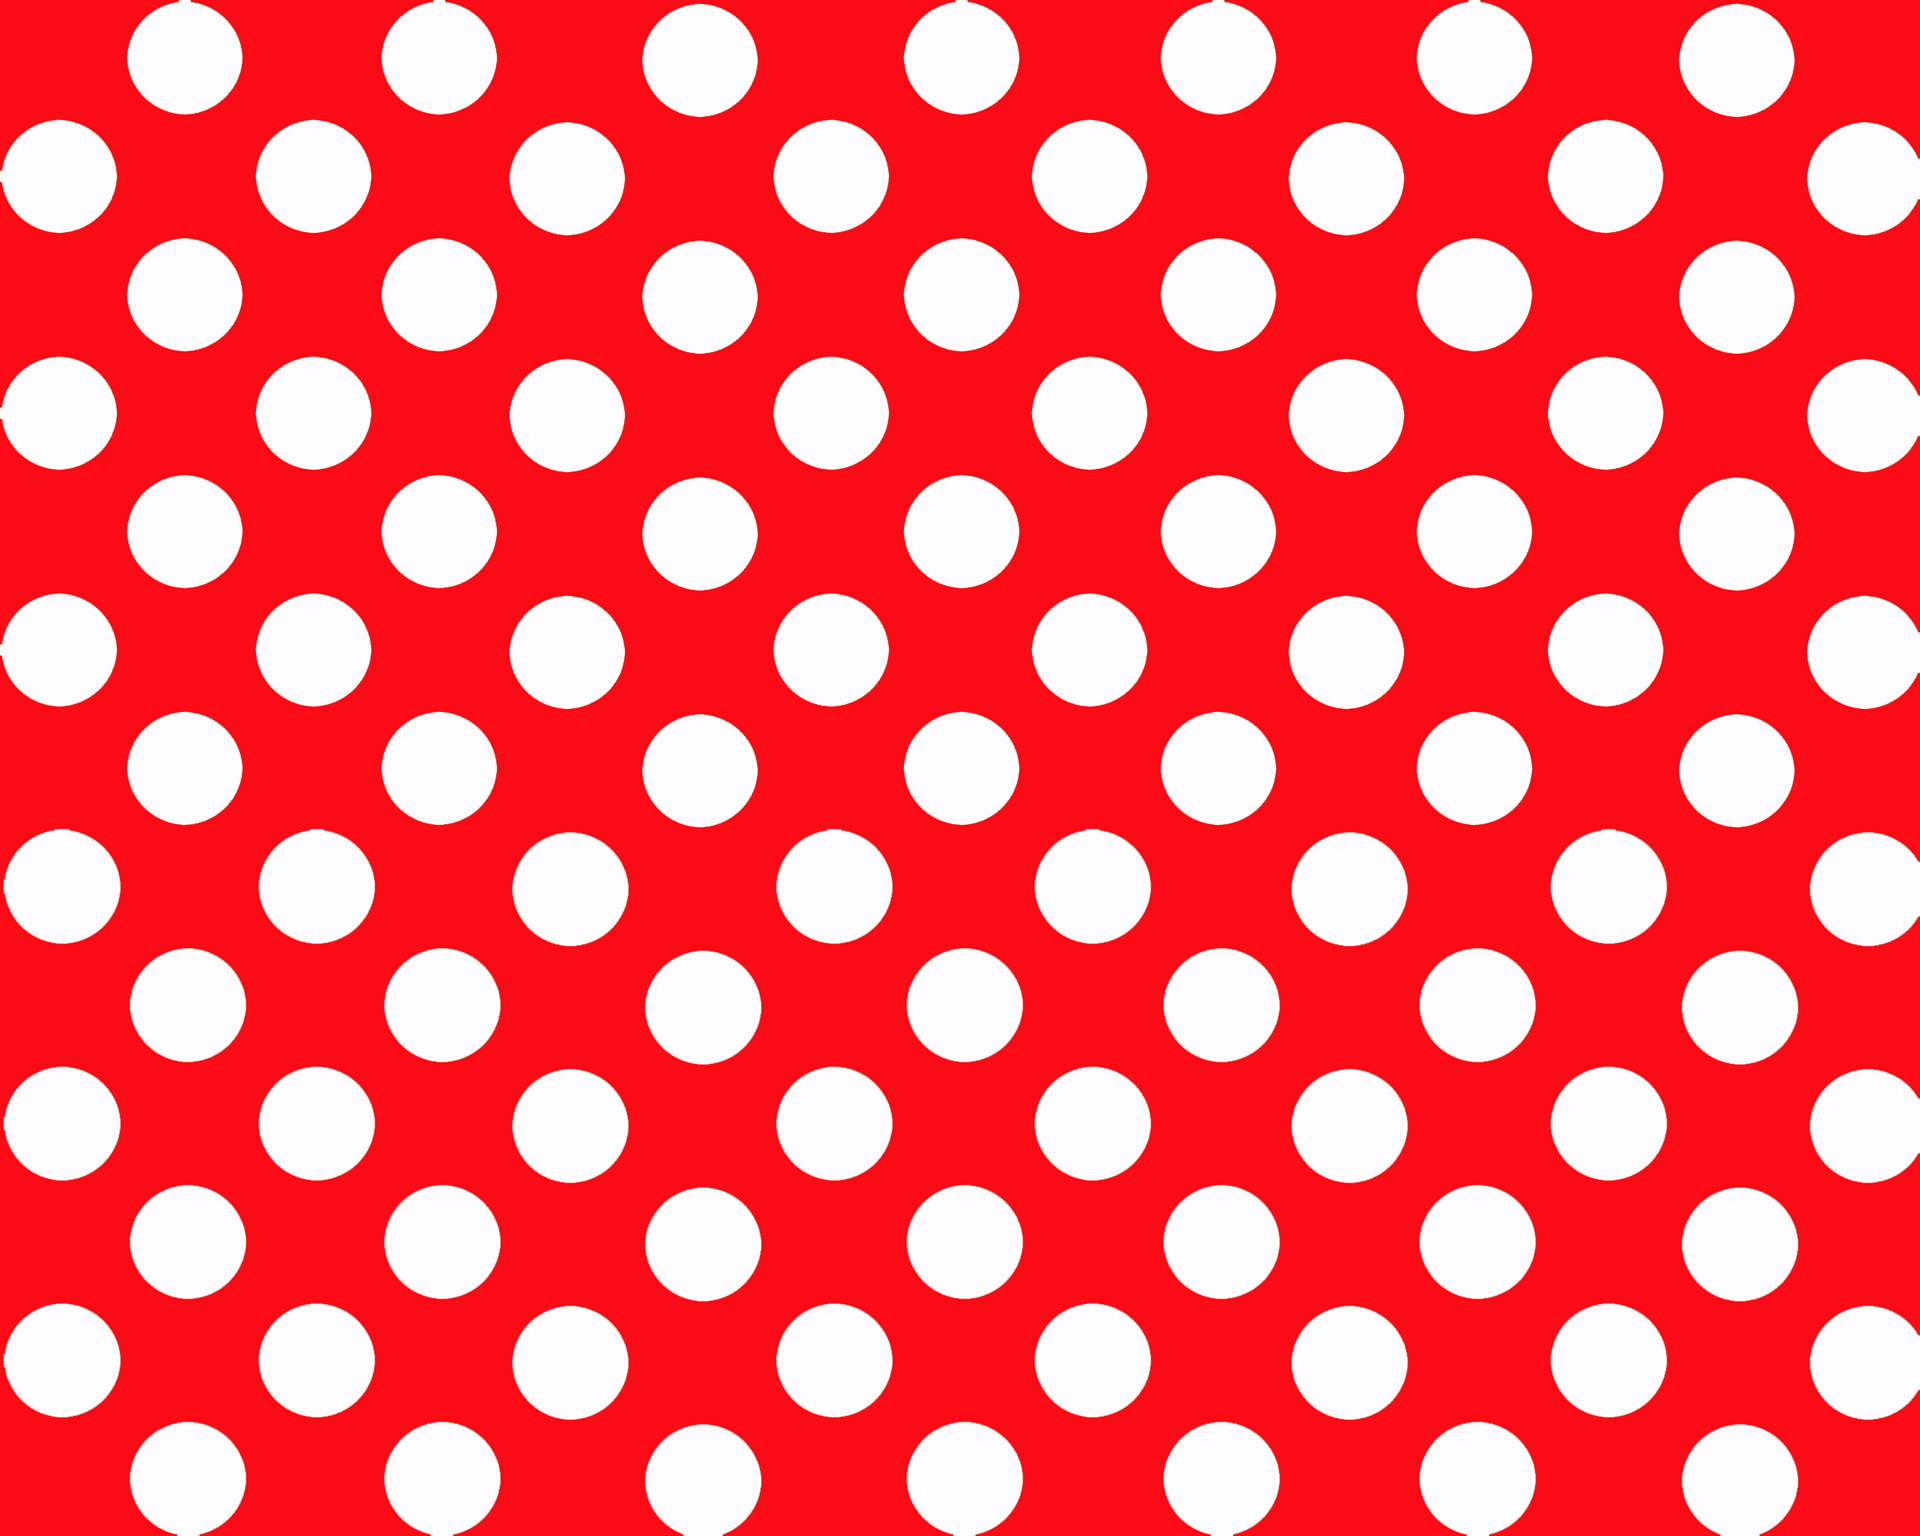 red polka dot background for cards, invites, scrapbooking, etc.